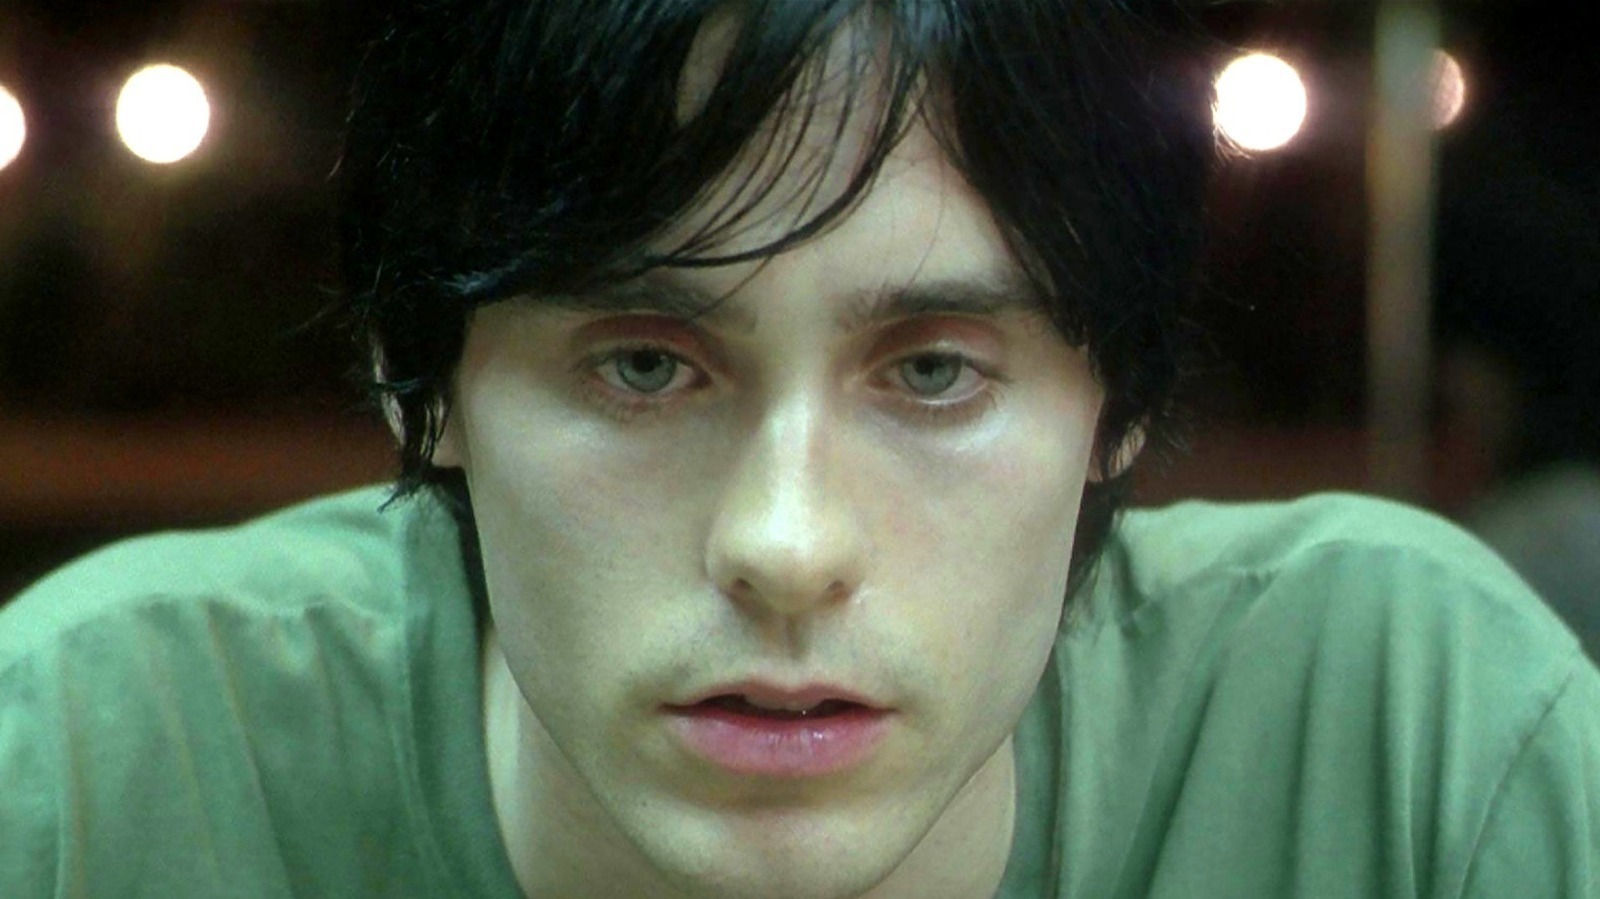 beautiful and disturbing movies - Requiem for a Dream